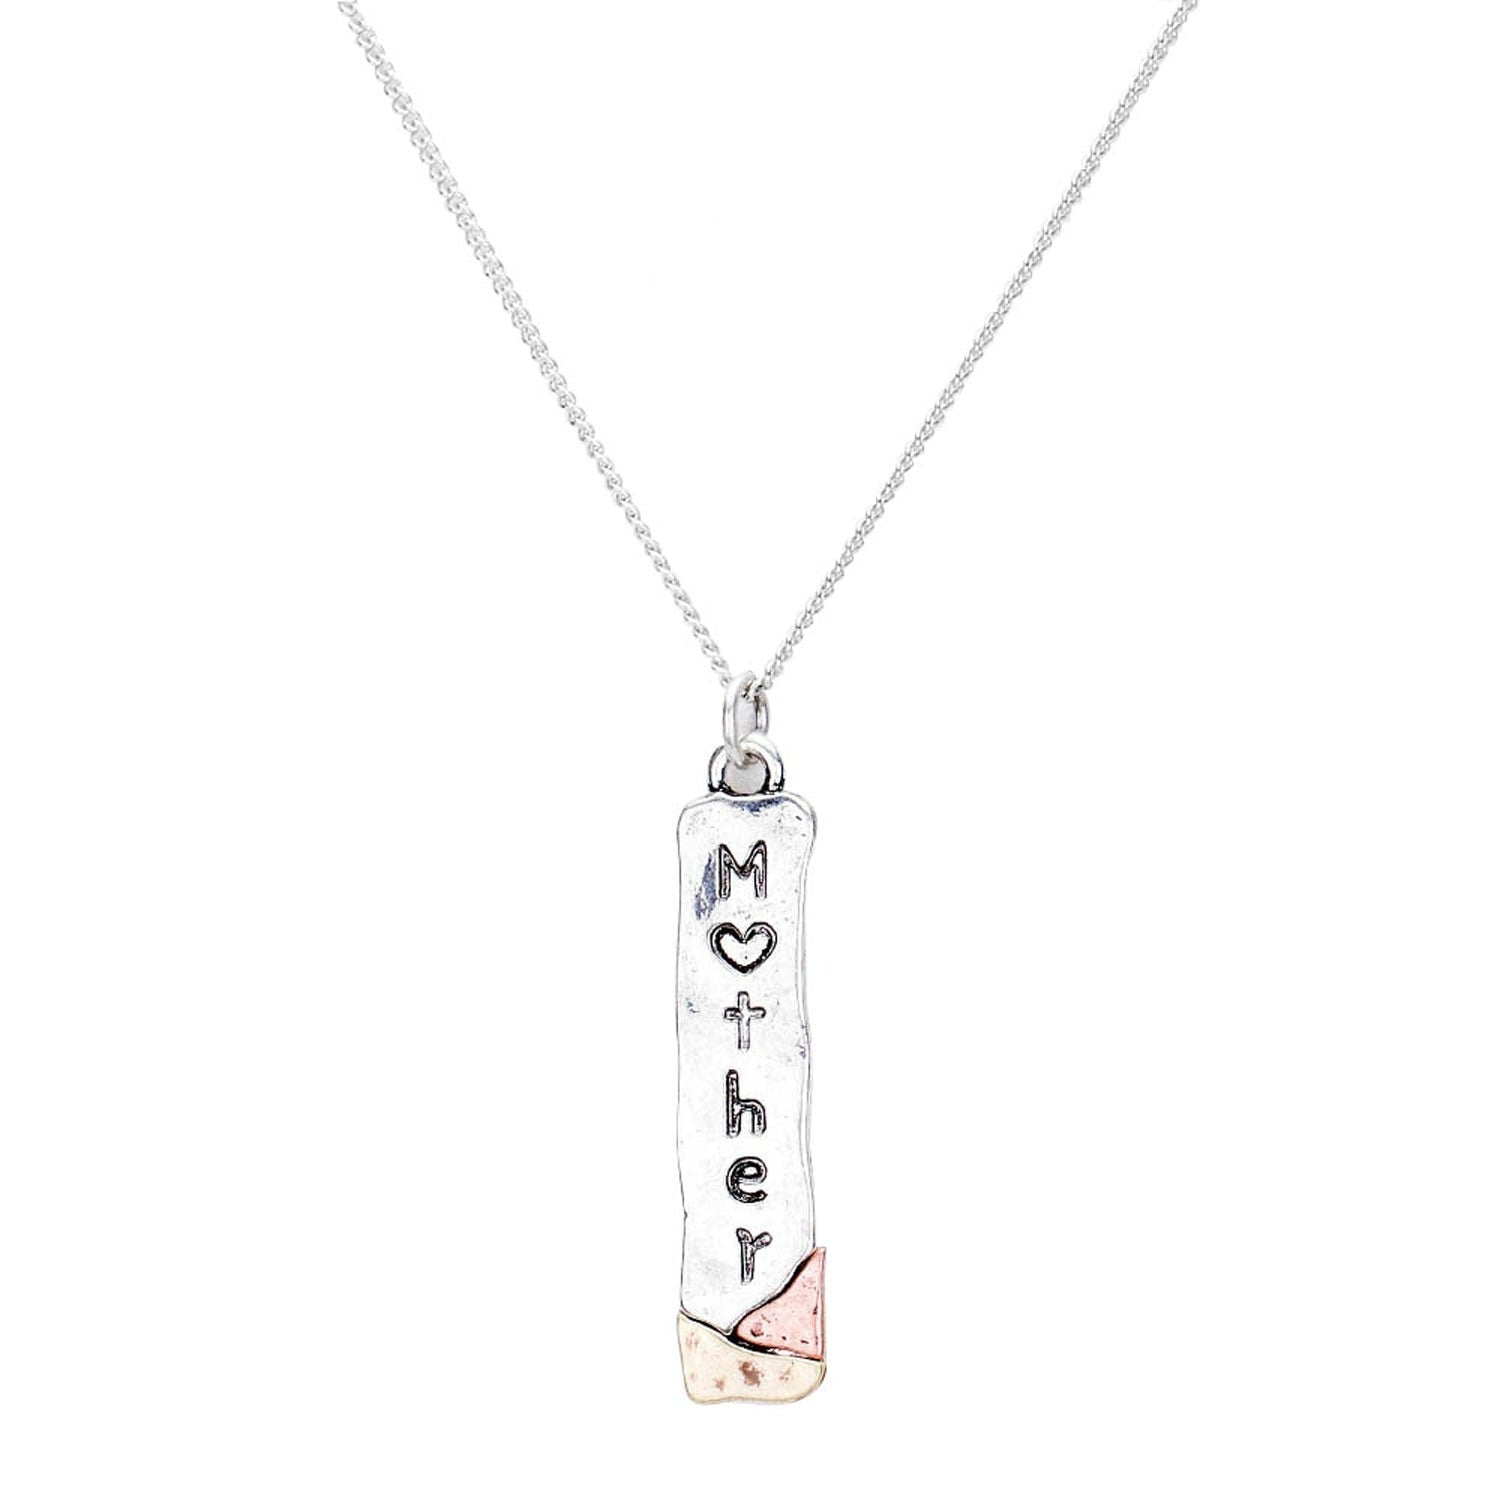 Silver Mother Metal Bar Pendant Necklace, these Mother metal bar necklace can light up any outfit, and make you feel absolutely flawless. Fabulous fashion and sleek style adds a pop of pretty color to your attire. Make your mother feel special by giving this  pendant necklace as a gift and expressing your love for your mother on this Mother's Day.